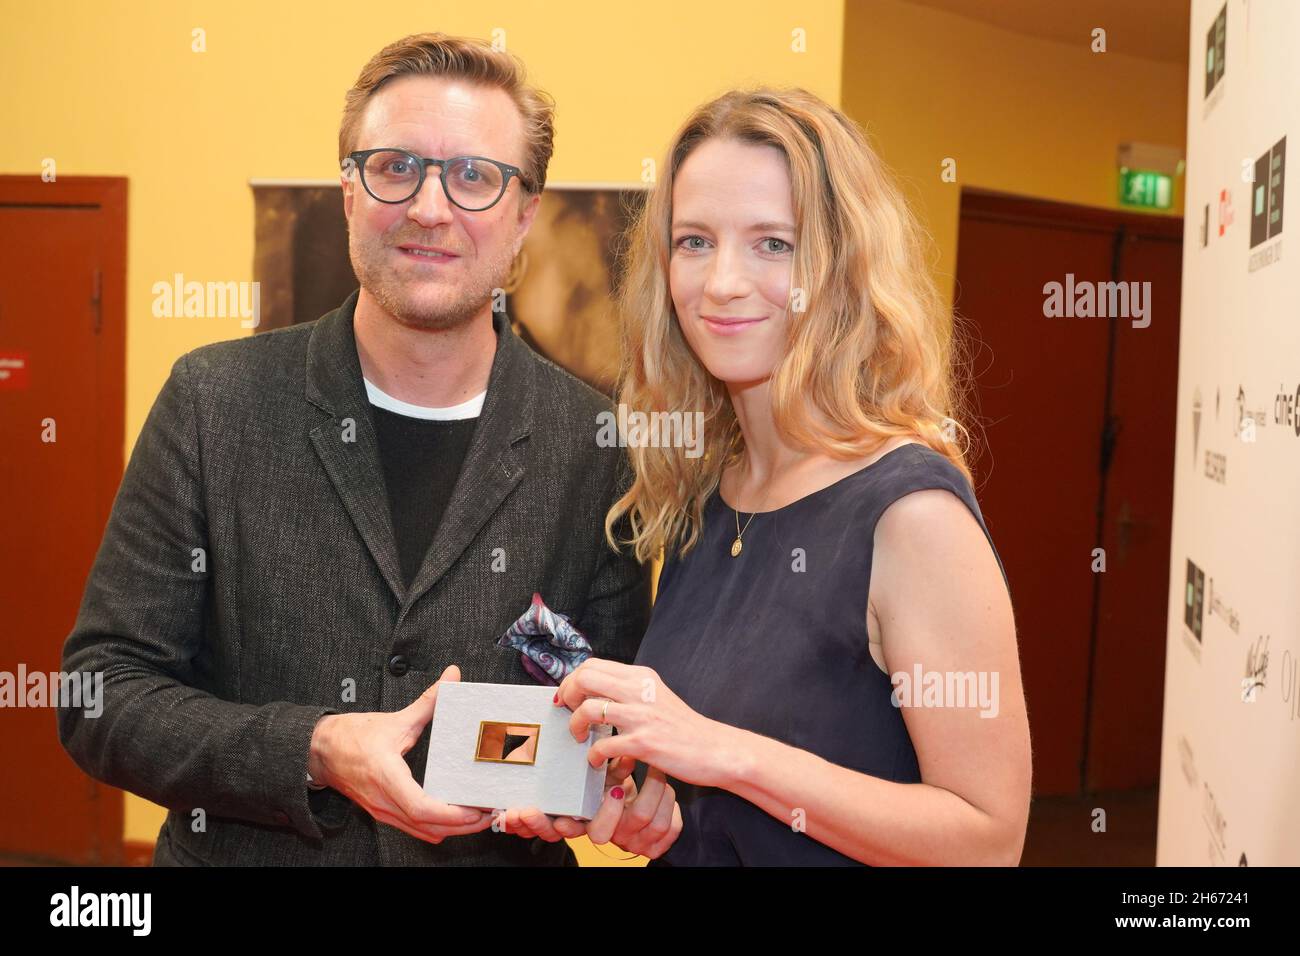 Berlin, Germany. 13th Nov, 2021. Carl Gierstorfer and Mareike Müller receive an award in the category 'Documentary Film' at the DAfF (German Academy for Television) awards ceremony at the Babylon cinema. Credit: Jörg Carstensen/dpa/Alamy Live News Stock Photo